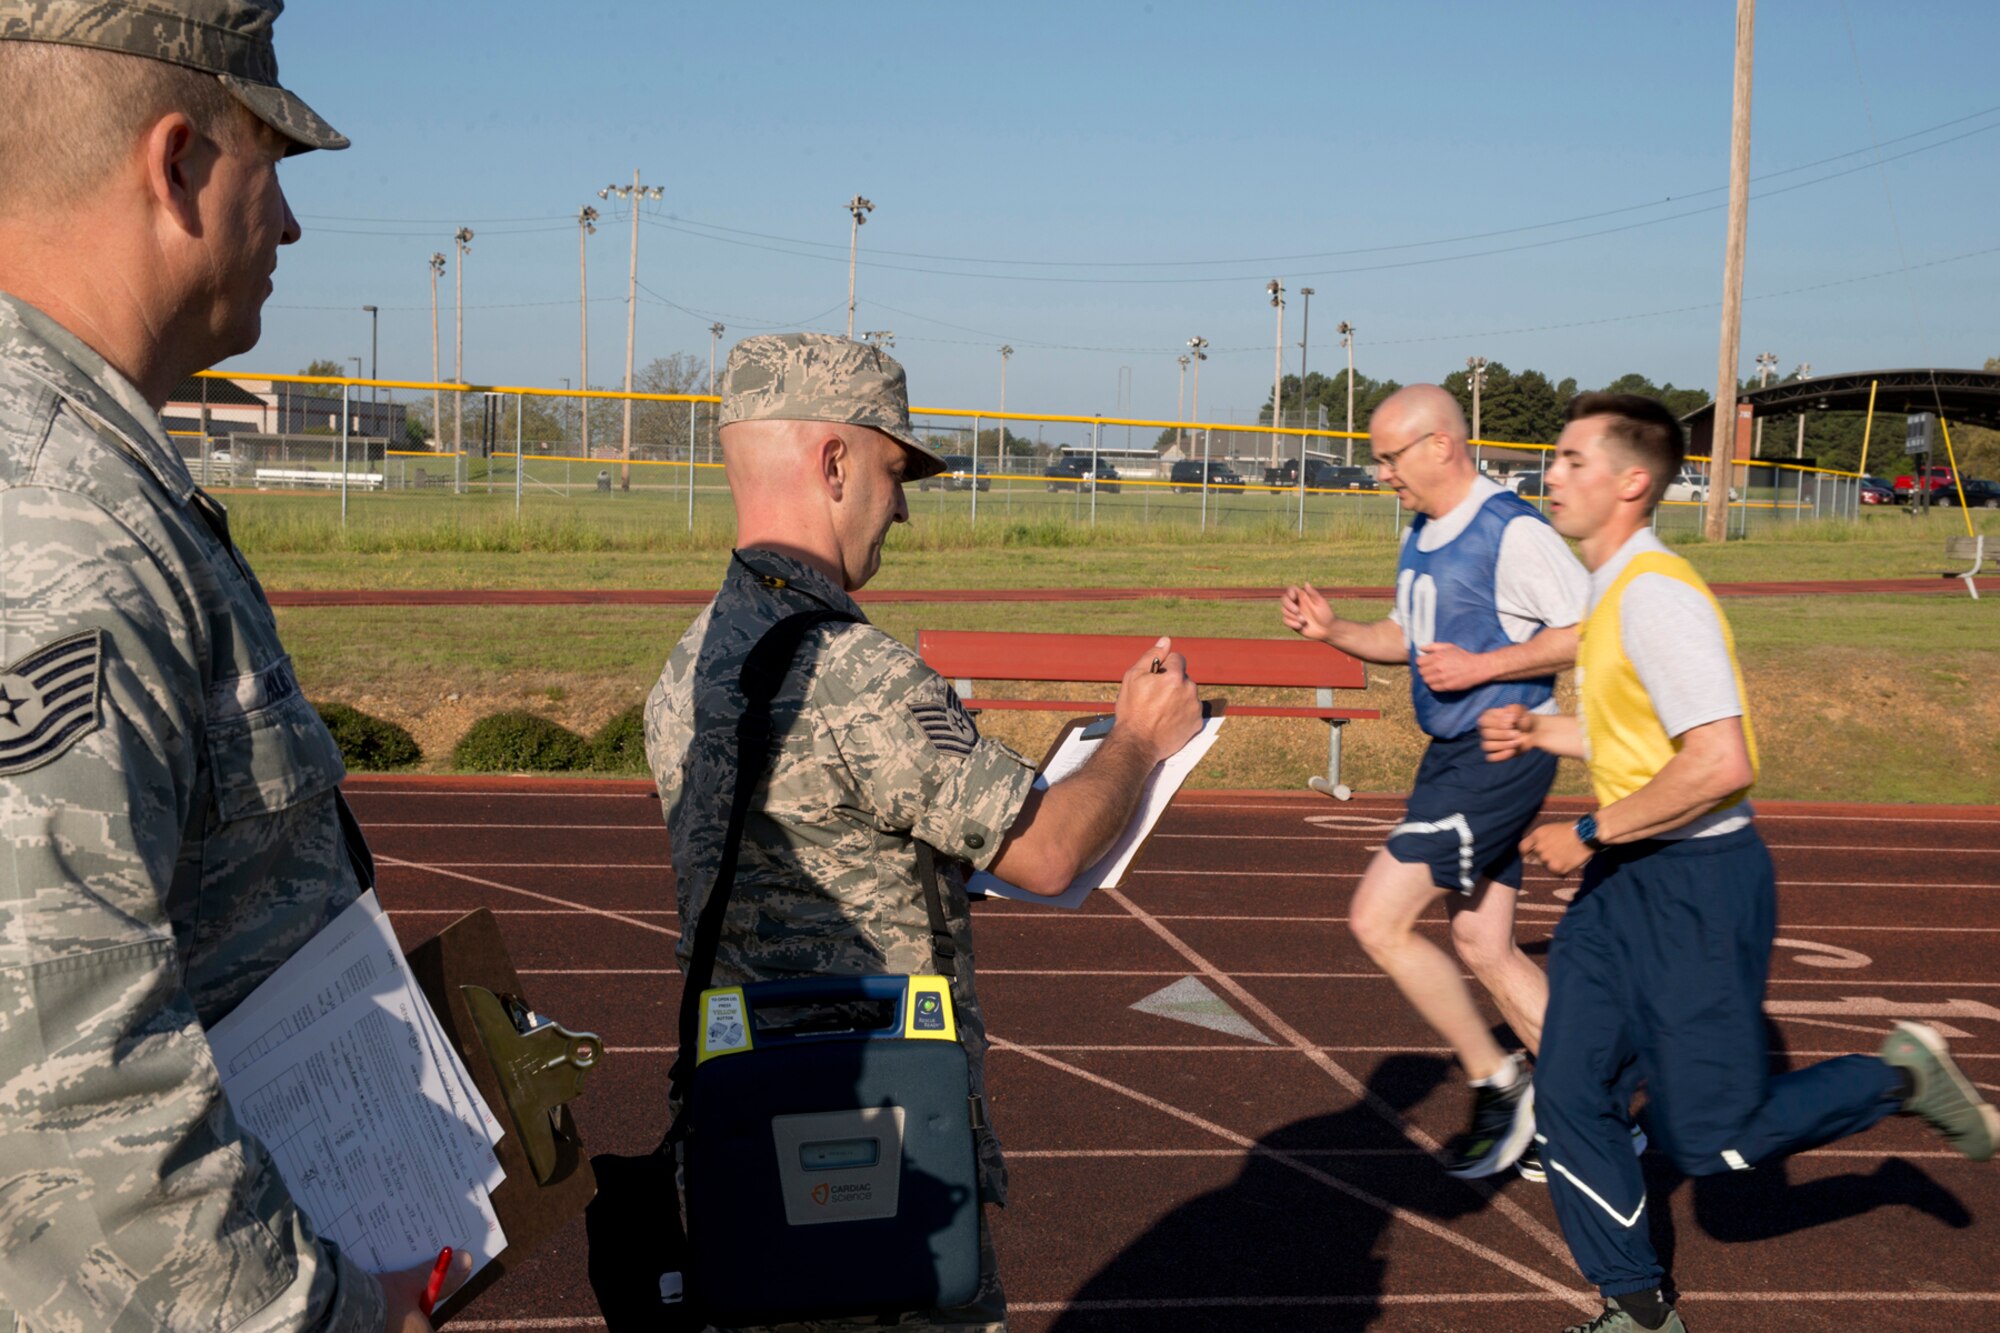 U.S. Air Force Reserve Tech. Sgt. Matt Cantone, calls out laps during the run portion of the physical fitness assessment test for the Airmen assigned to the 913th Airlift Group at Little Rock Air Force Base, Ark., Jan. 9, 2016. Cantone, an air ground equipment technician assigned to the 913th Maintenance Squadron, volunteered as a Physical Training Leader and monitors and records scores for fellow Airmen as they completed their tests. (U.S. Air Force photo by Master Sgt. Jeff Walston/Released)